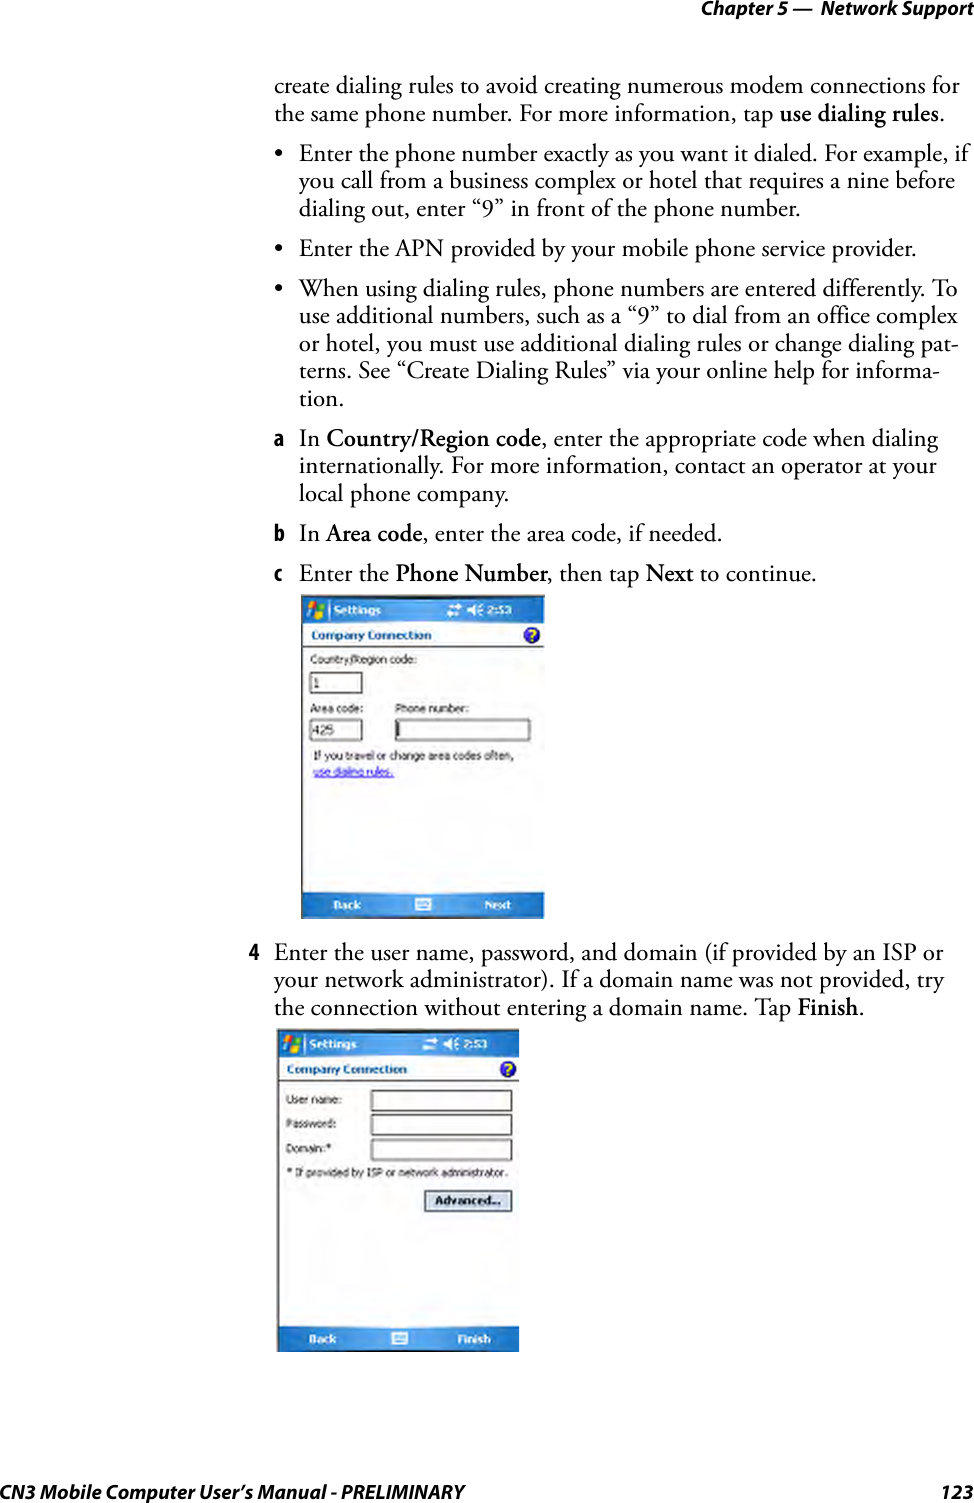 Chapter 5 —  Network SupportCN3 Mobile Computer User’s Manual - PRELIMINARY 123create dialing rules to avoid creating numerous modem connections for the same phone number. For more information, tap use dialing rules.• Enter the phone number exactly as you want it dialed. For example, if you call from a business complex or hotel that requires a nine before dialing out, enter “9” in front of the phone number.• Enter the APN provided by your mobile phone service provider.• When using dialing rules, phone numbers are entered differently. To use additional numbers, such as a “9” to dial from an office complex or hotel, you must use additional dialing rules or change dialing pat-terns. See “Create Dialing Rules” via your online help for informa-tion.aIn Country/Region code, enter the appropriate code when dialing internationally. For more information, contact an operator at your local phone company.bIn Area code, enter the area code, if needed.cEnter the Phone Number, then tap Next to continue.4Enter the user name, password, and domain (if provided by an ISP or your network administrator). If a domain name was not provided, try the connection without entering a domain name. Tap Finish.